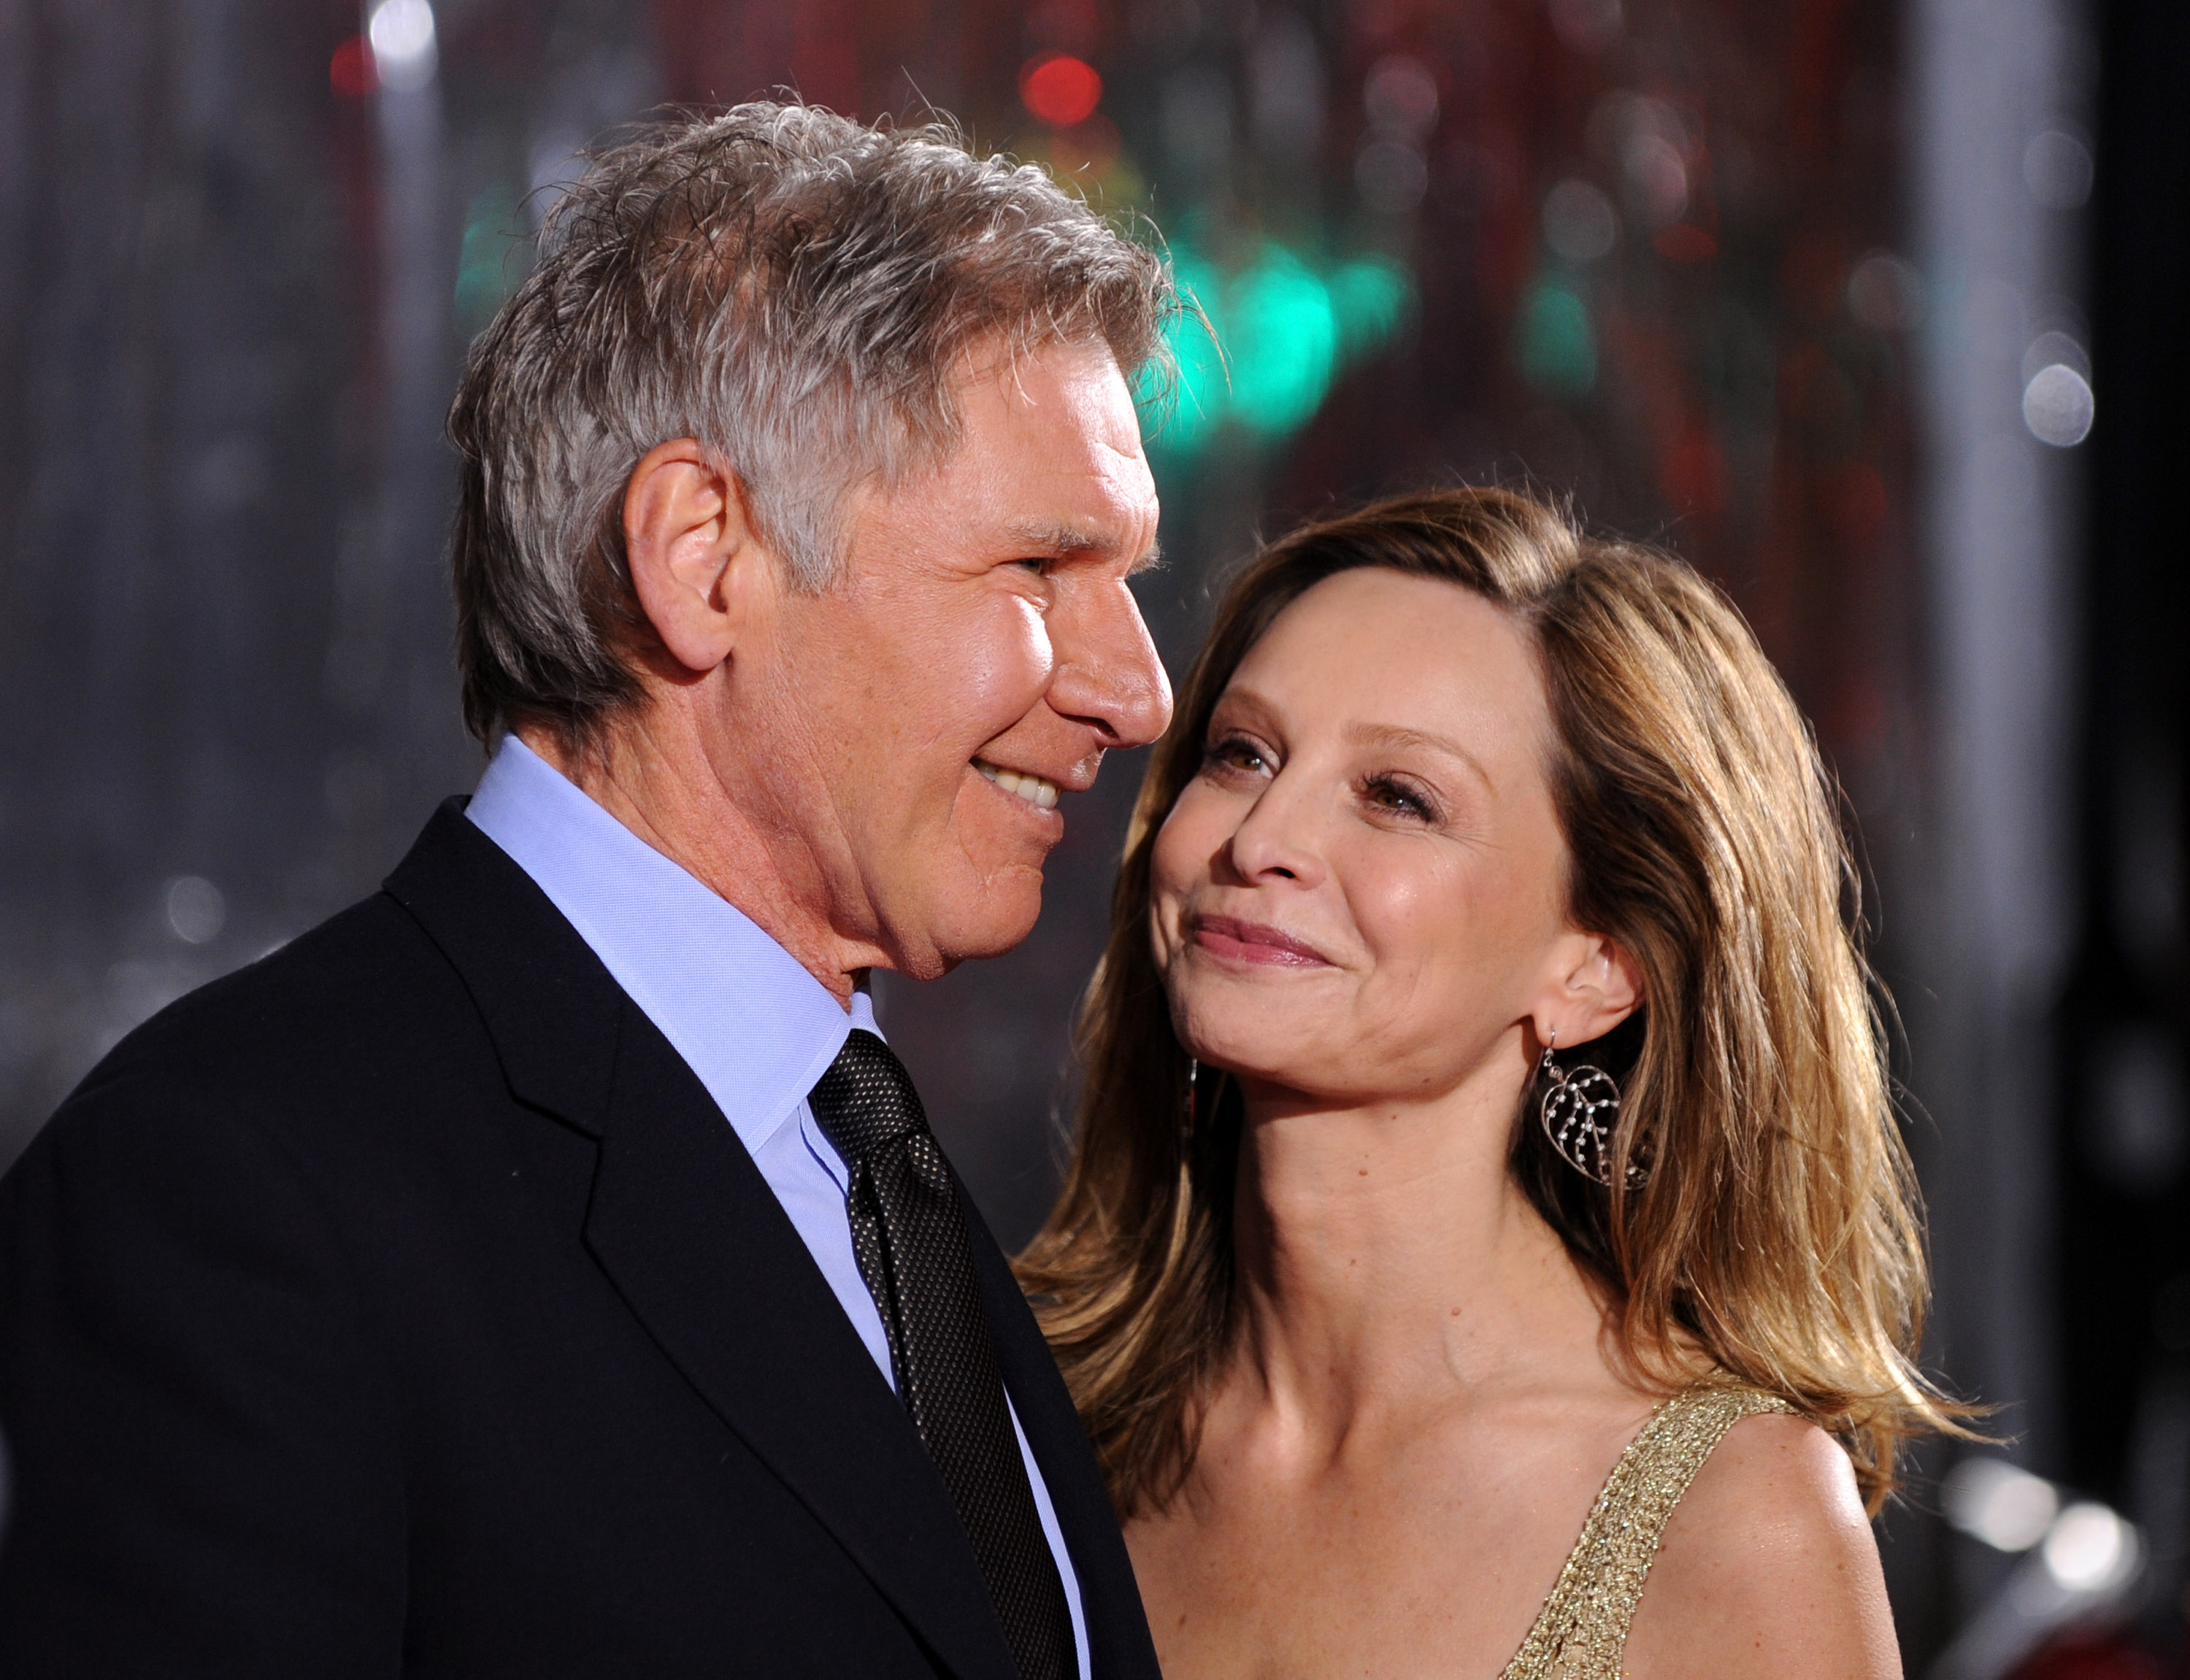 Harrison Ford and Calista Flockhart at the premiere of "Extraordinary Measures" in Hollywood, California on January 19, 2010 | Source: Getty Images